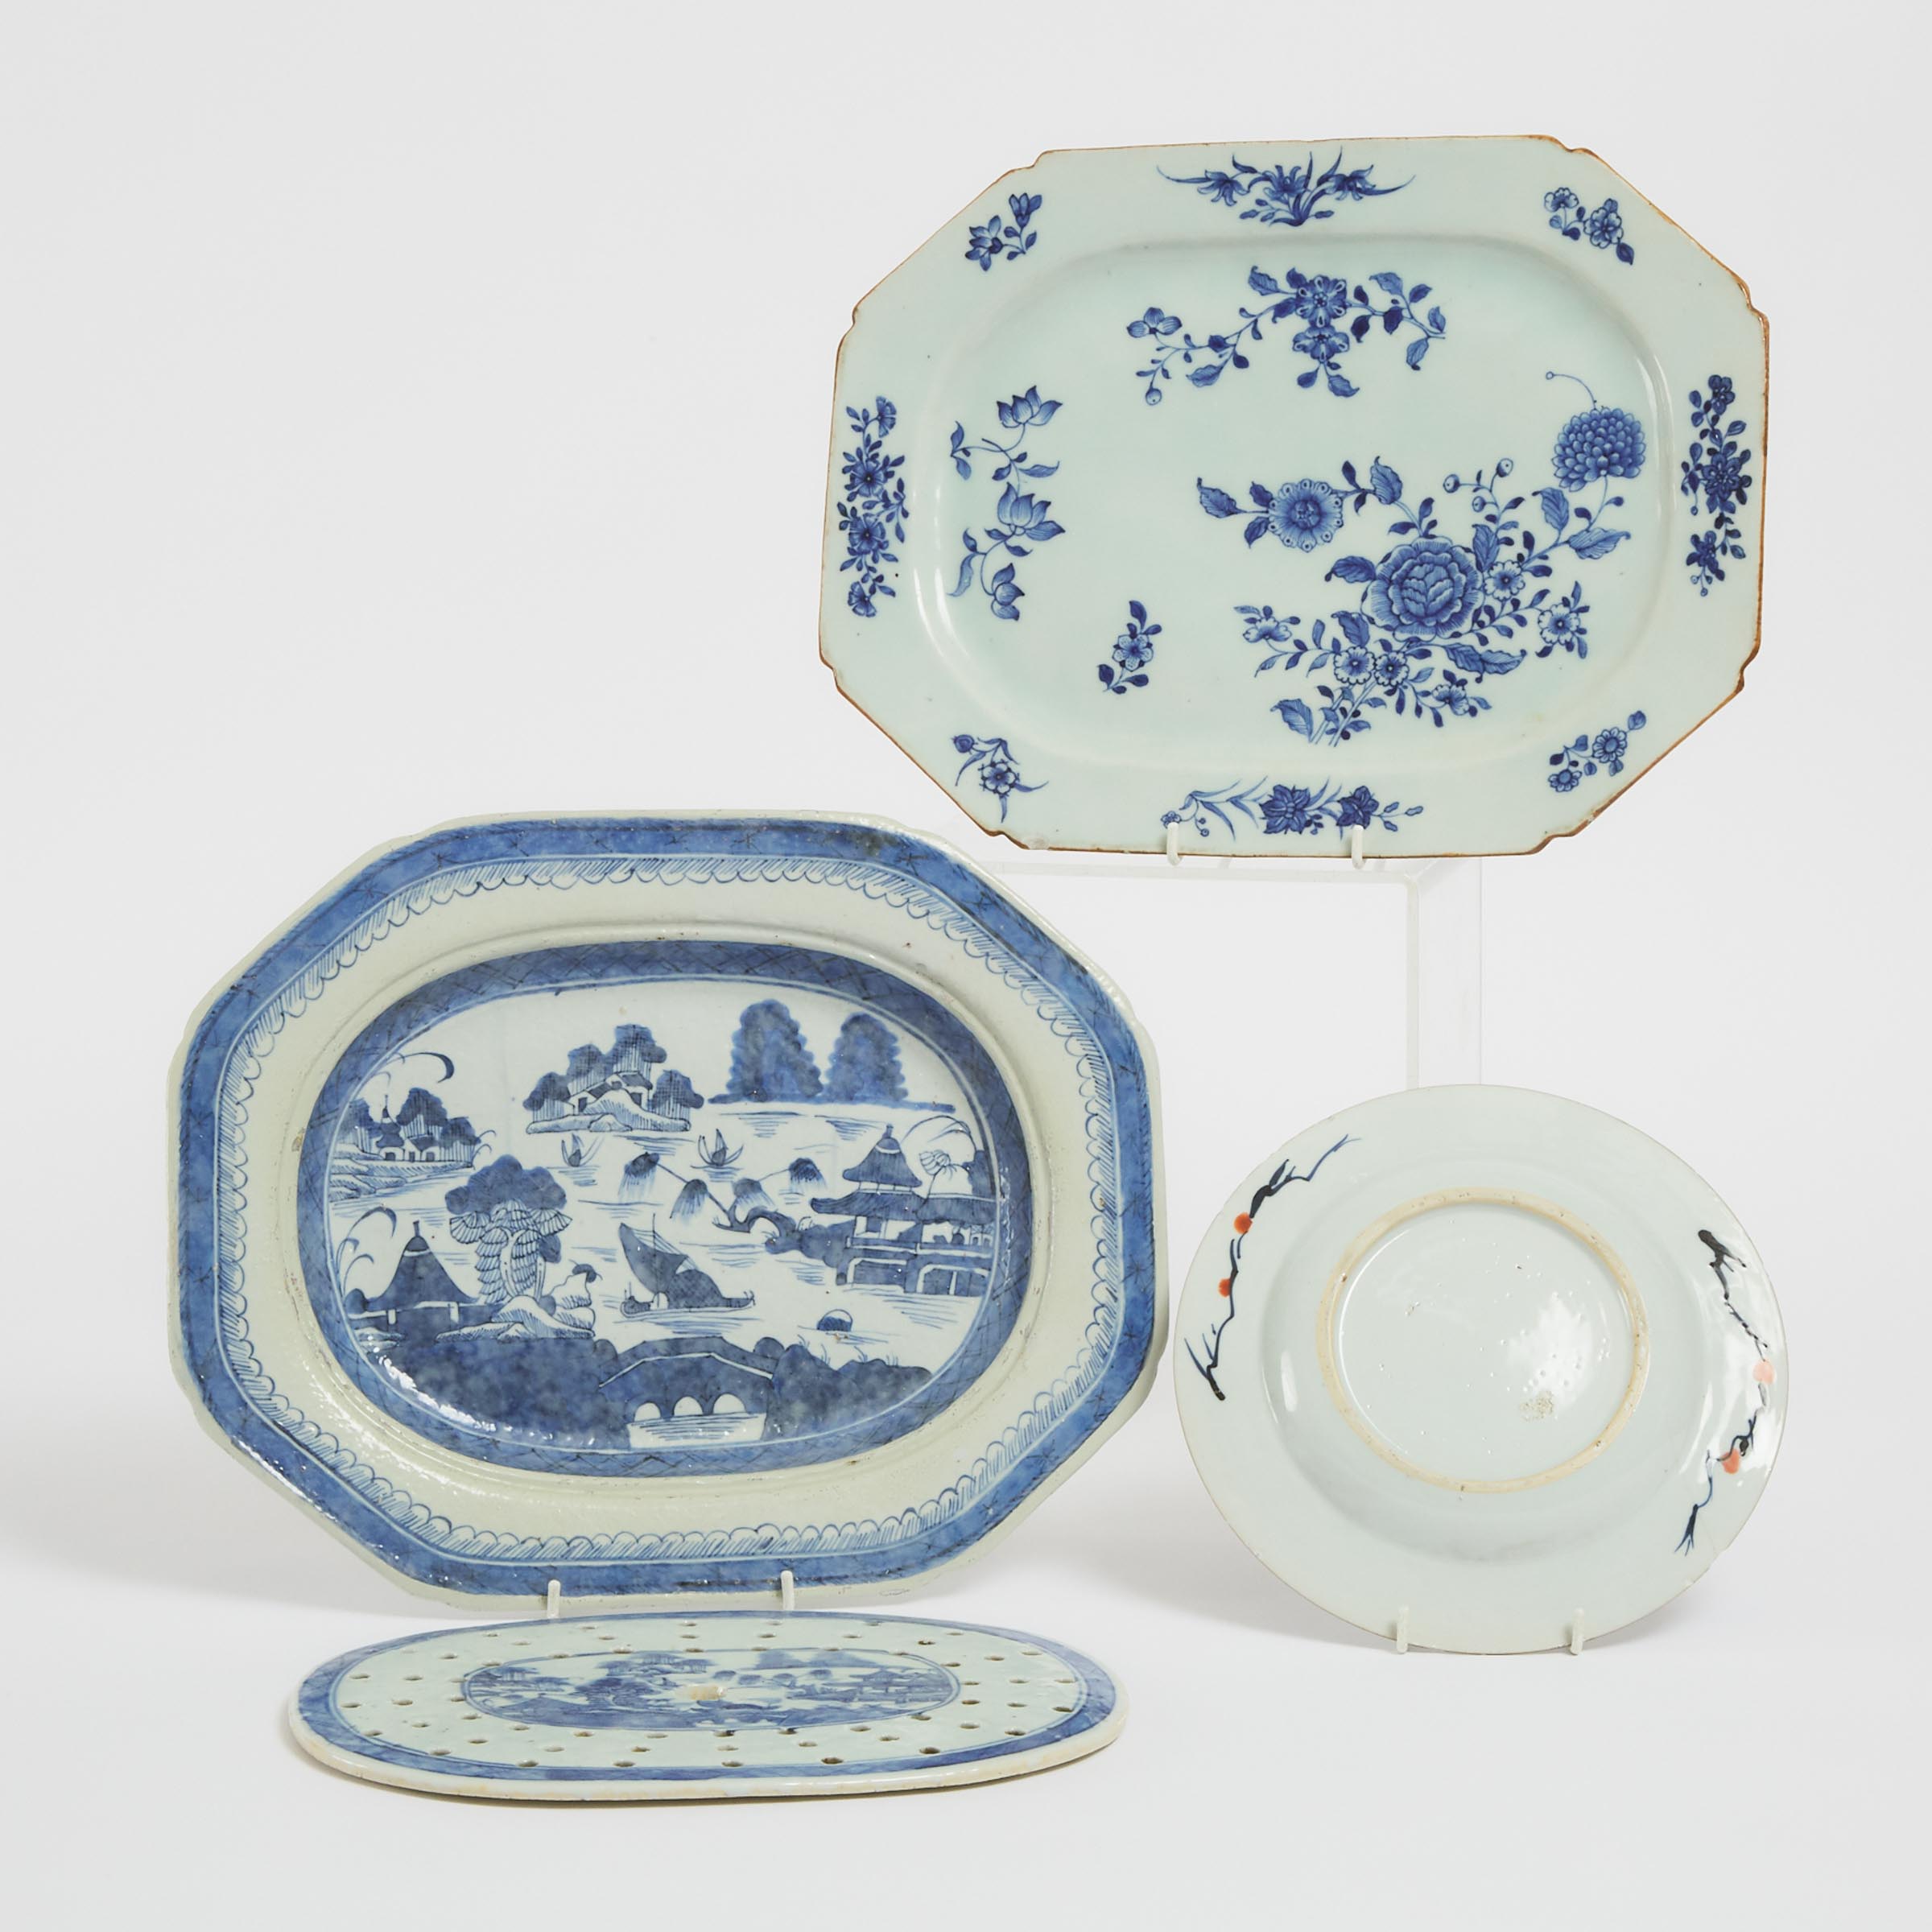 A Chinese Export Blue and White Platter, Together With a Meat Dish and Mazarine and an Imari Plate, 18th/19th Century